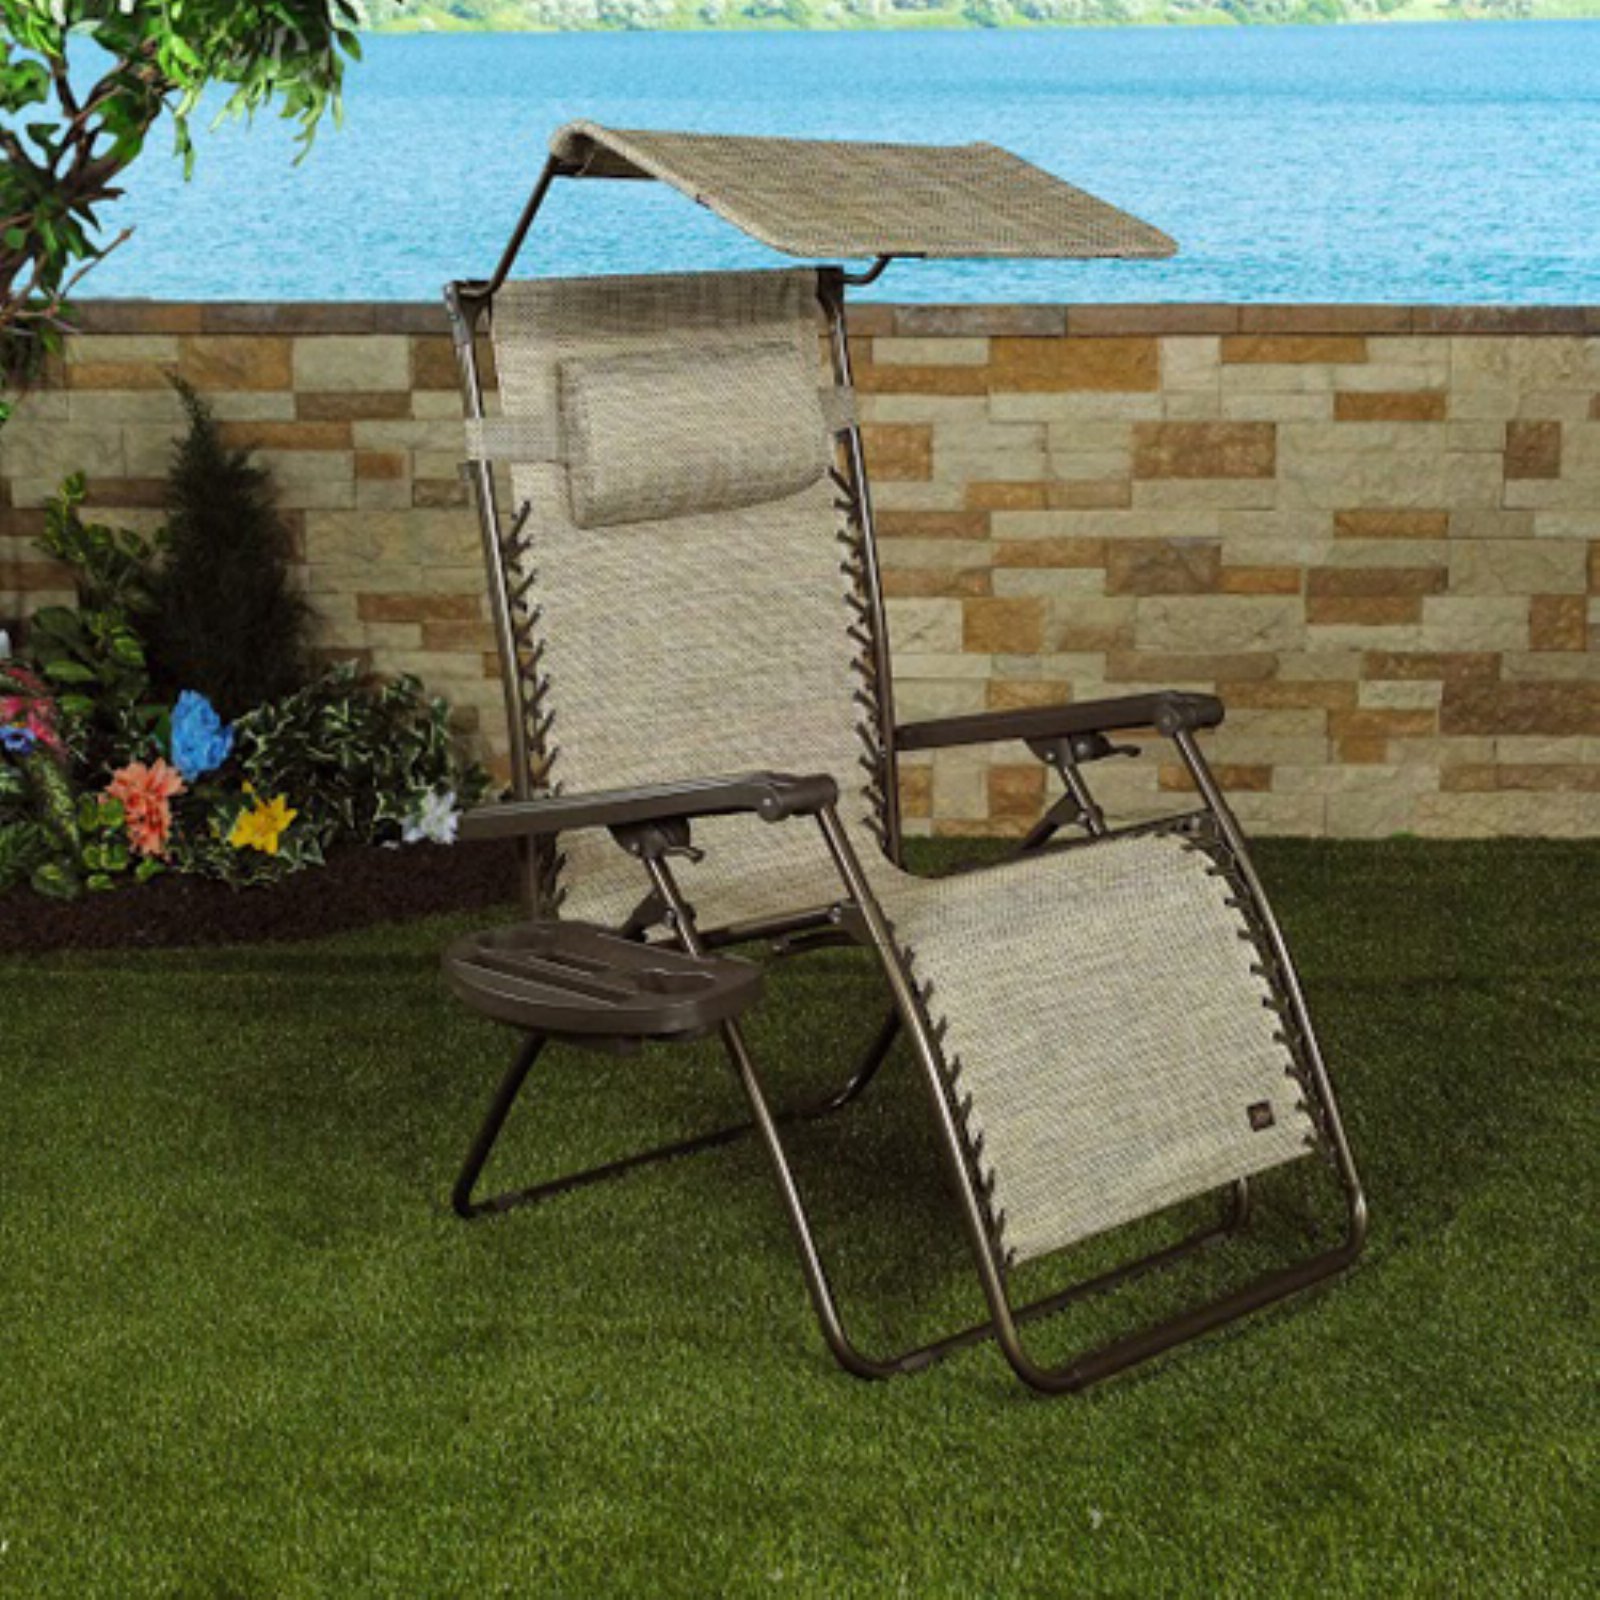 Bliss Hammocks 30" Wide XL Zero Gravity Chair w/ Canopy, Pillow, & Drink Tray Folding Outdoor Lawn, Deck, Patio Adjustable Lounge Chair, 360 lbs. Capacity, Weather and Rust Resistant, Sage Green - image 3 of 11